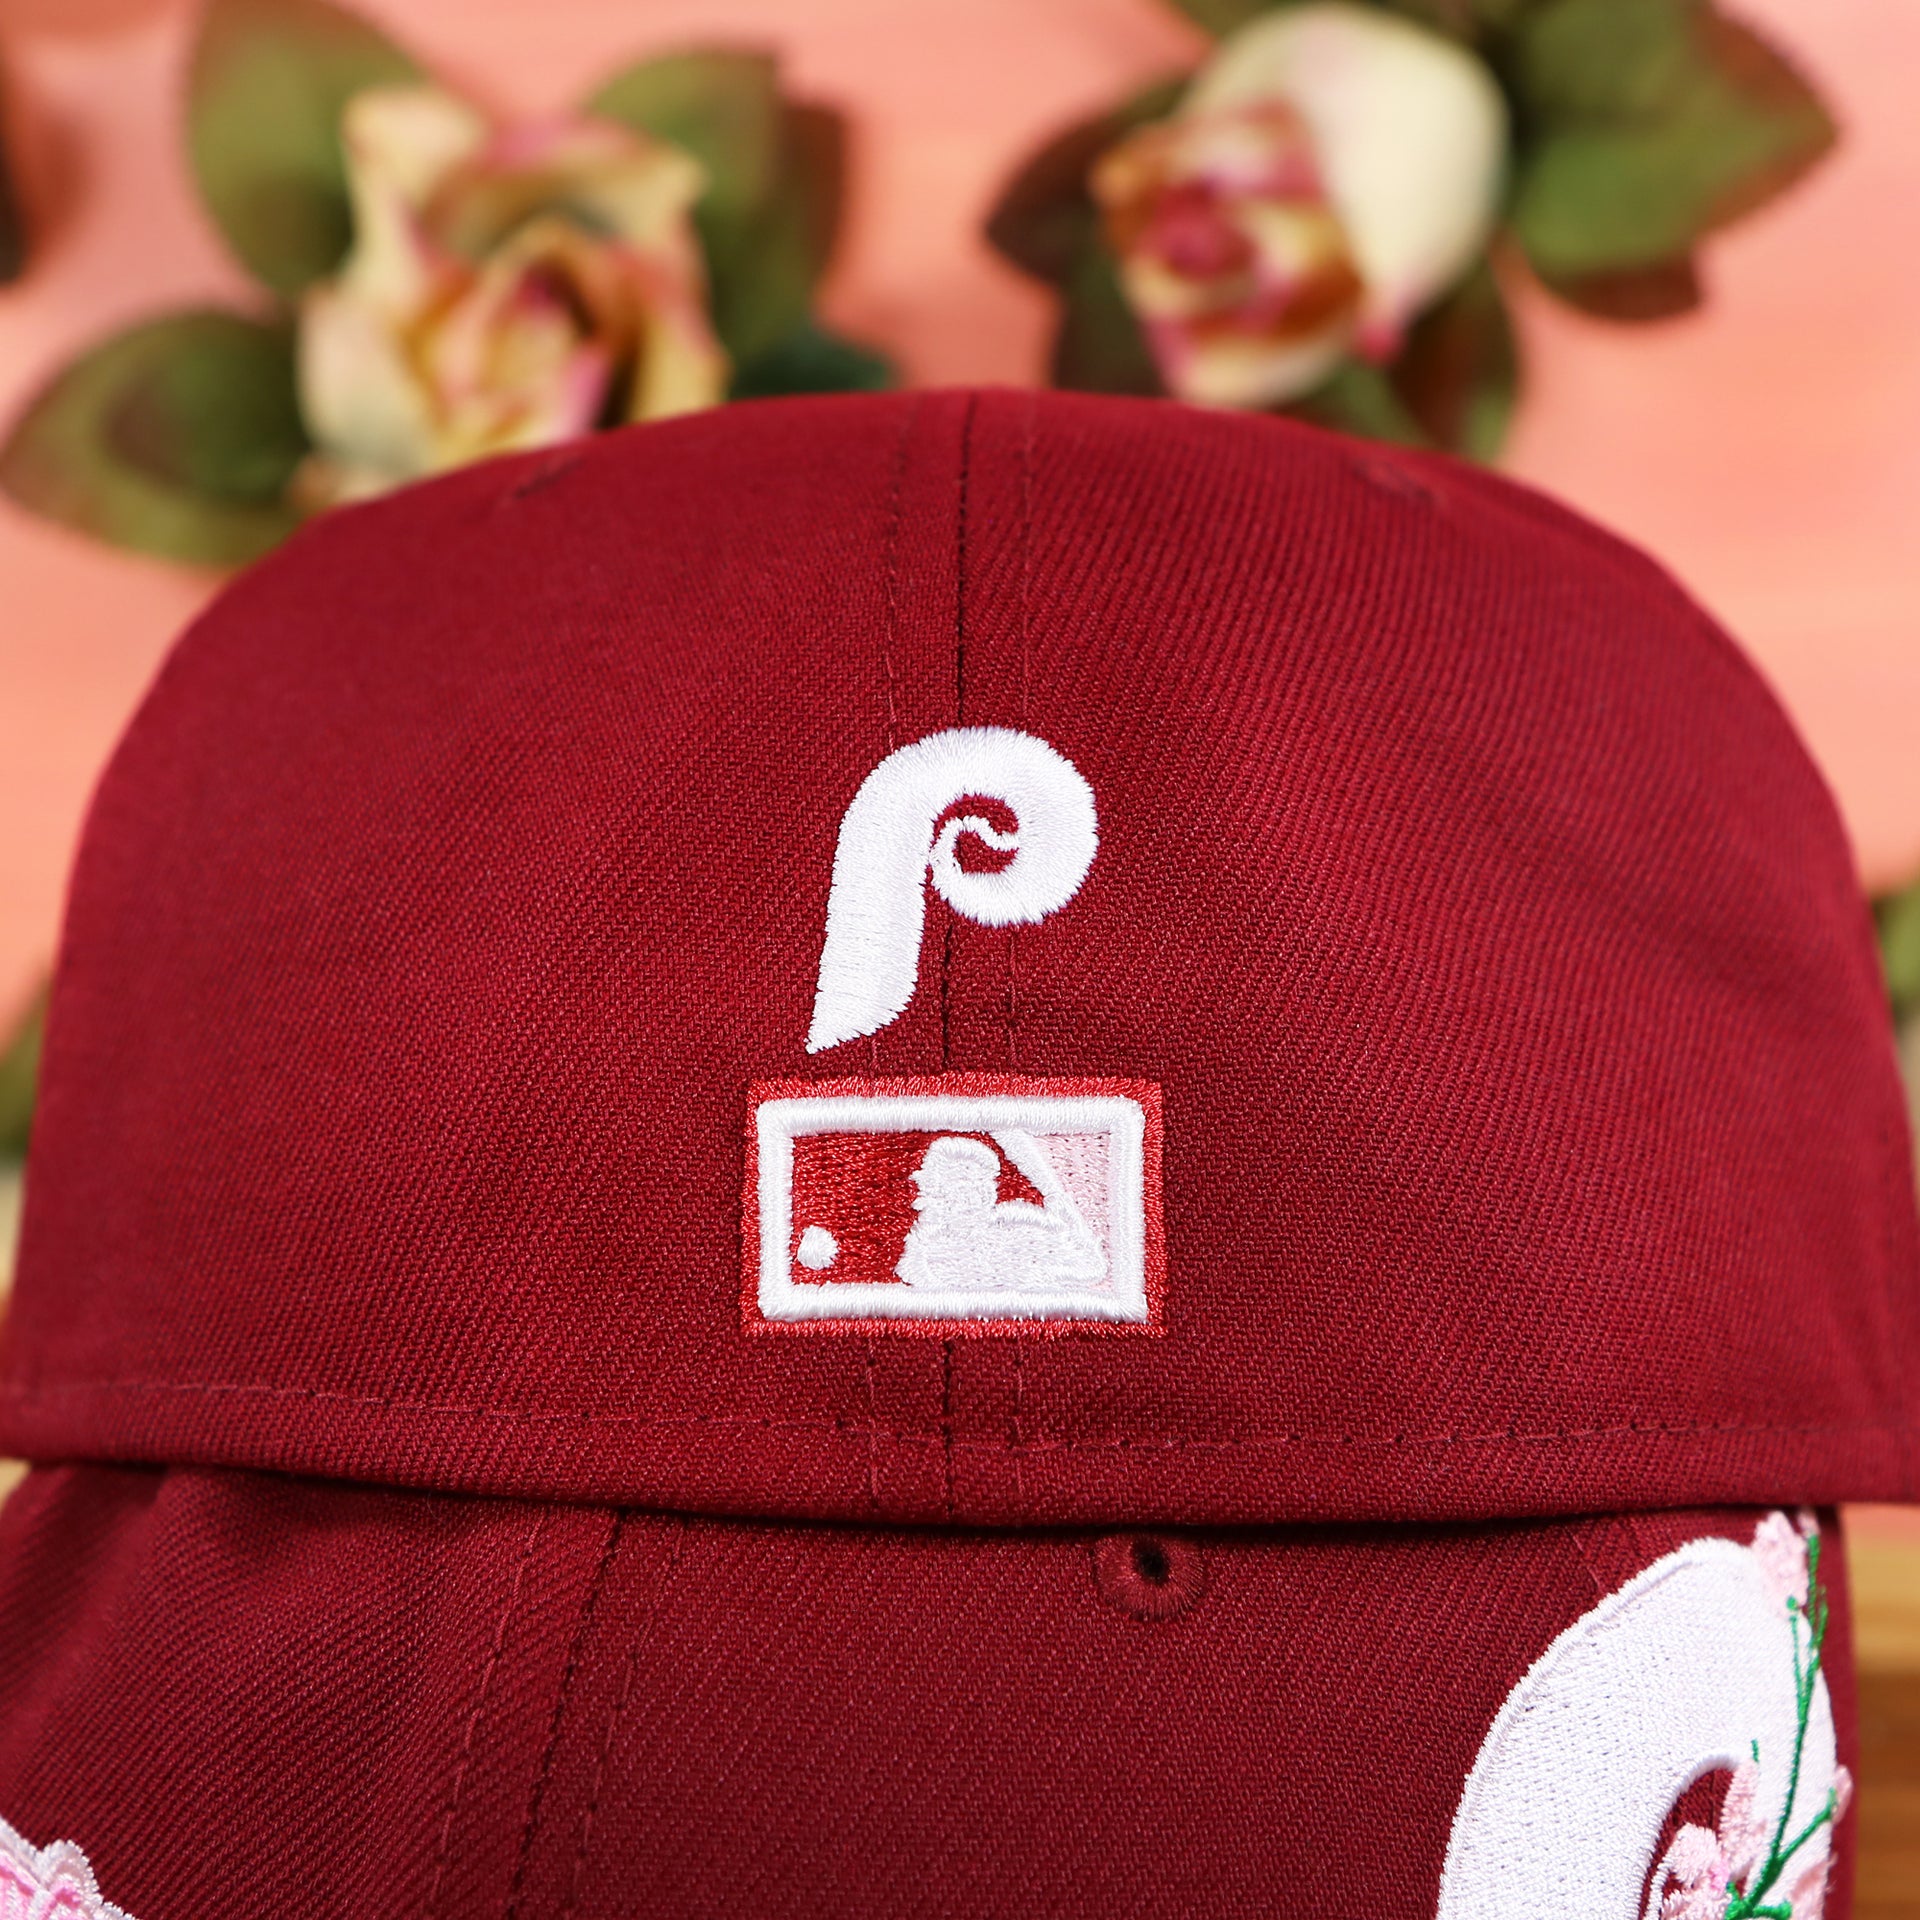 The Cooperstown Mini Phillies Logo and Retro MLB Batterman logo on the Cooperstown Philadelphia Philadelphia Pink Undervisor Sakura Tree Embroidered 59Fifty Fitted Cap | Maroon 59Fifty Cap